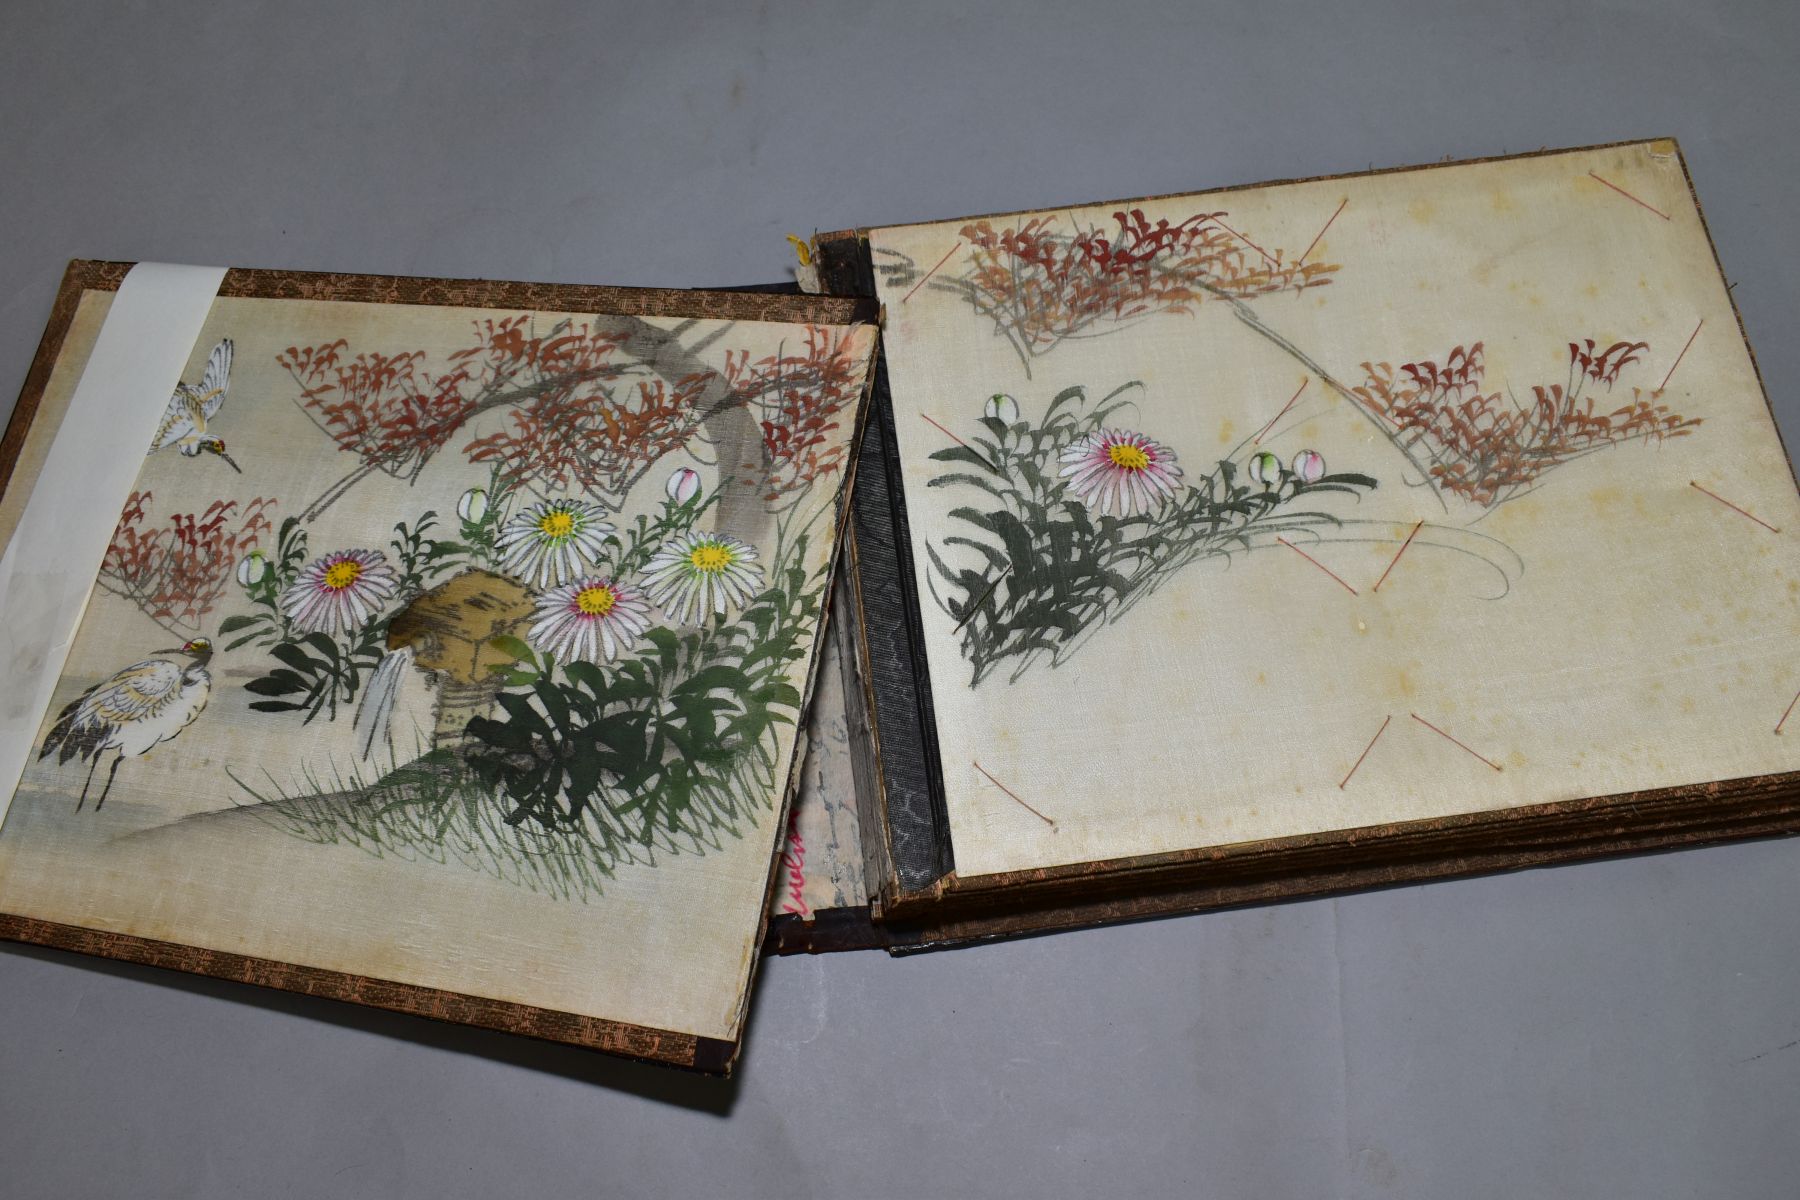 A SHIBYAMA LAQUERED PHOTOGRAPH/POSTCARD ALBUM, containing 20 leaves of painted silk illustrations, - Image 3 of 8